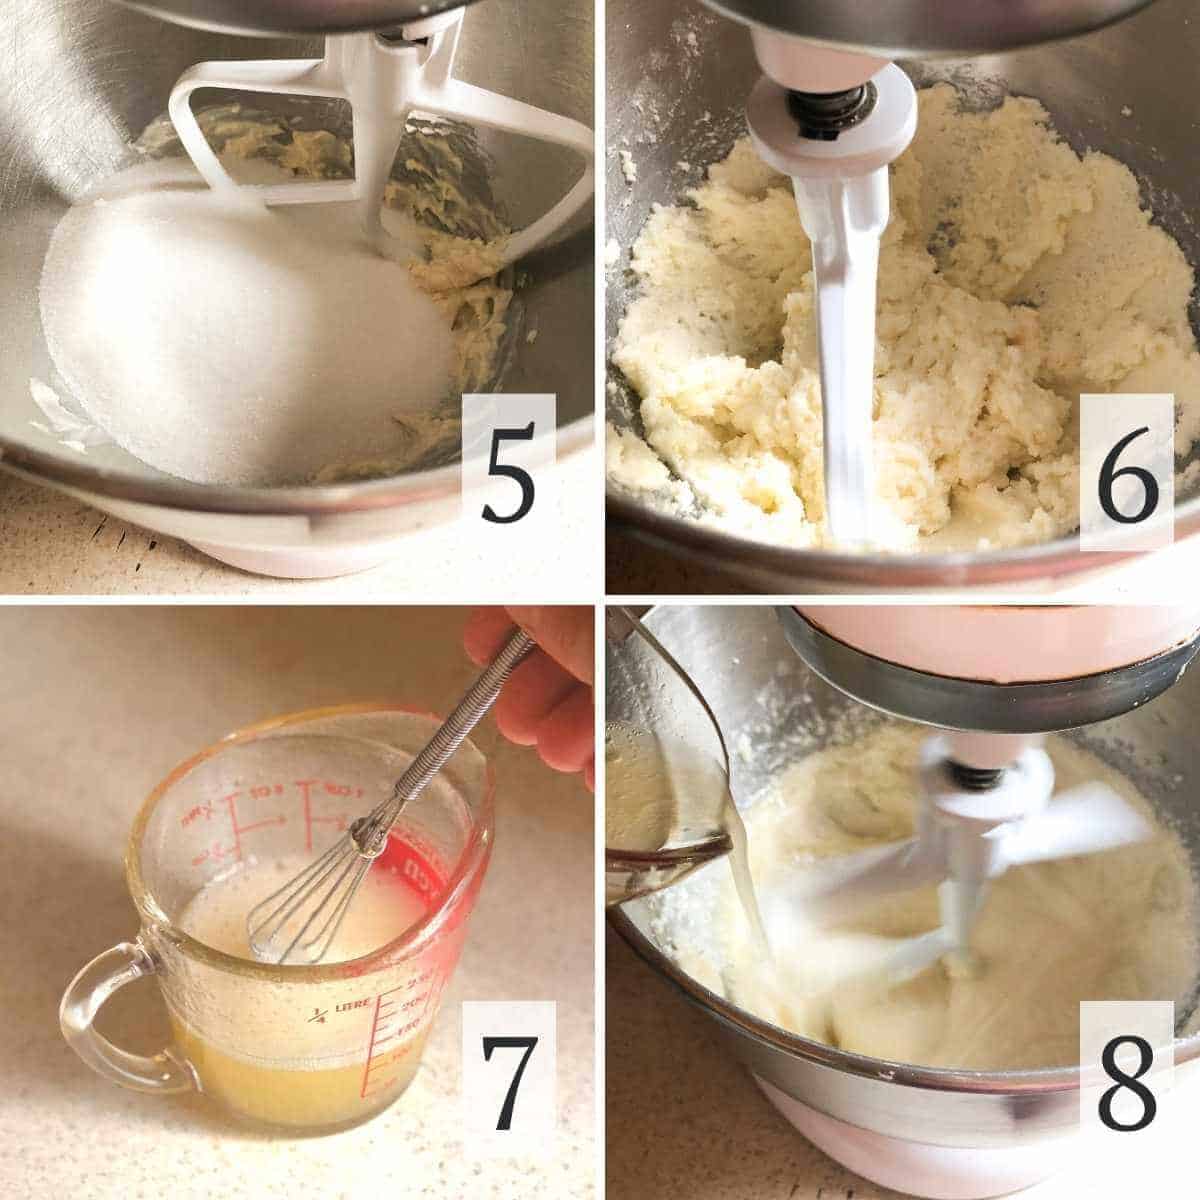 Steps 5 through 8 to make cupcakes including creaming together the margarine and sugar and adding the aquafaba.